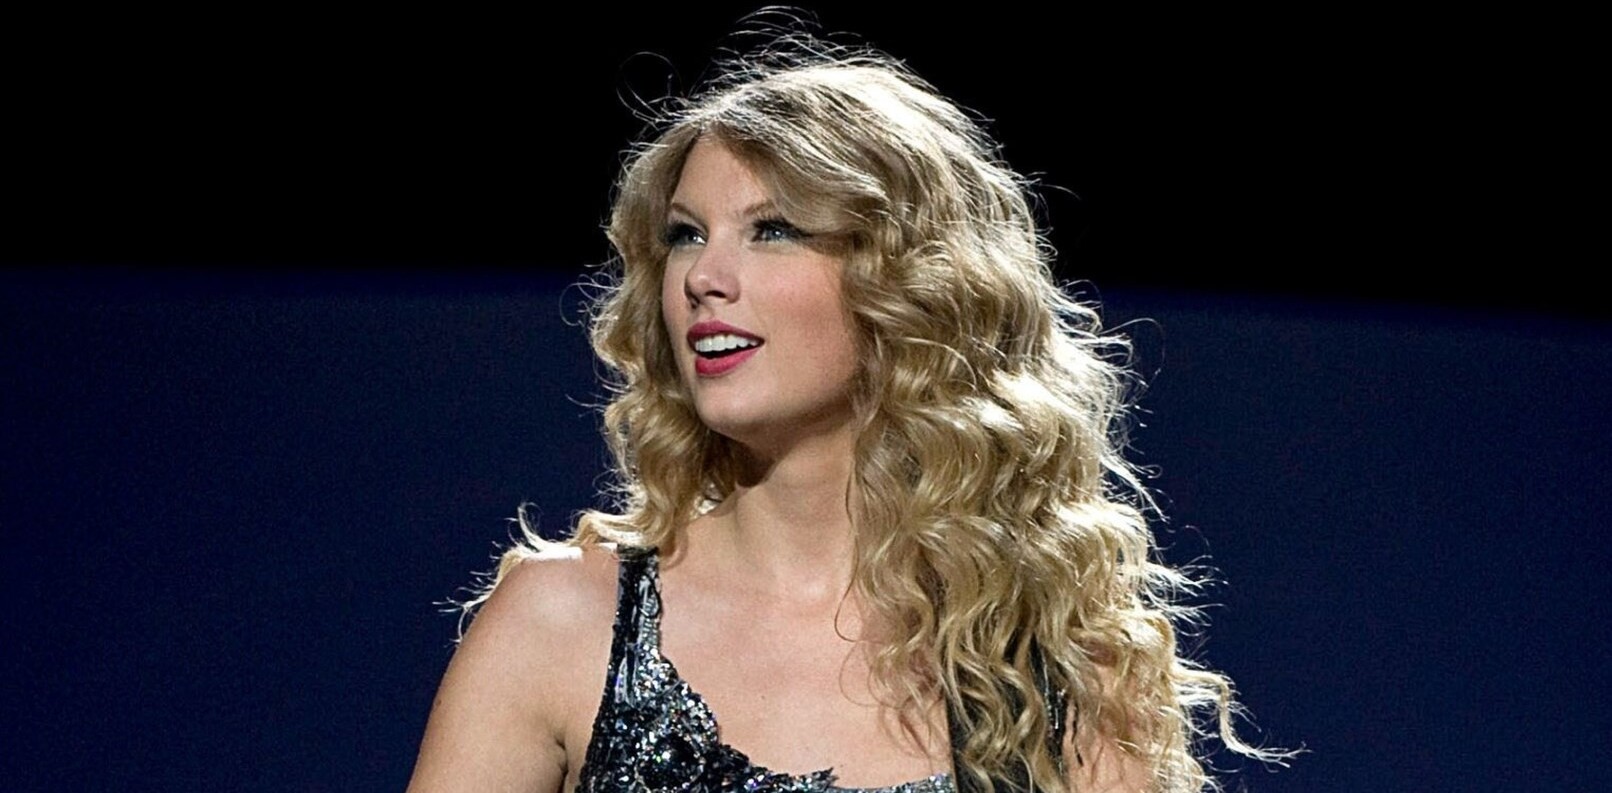 Apple responds to Taylor Swift’s open letter, promises to pay royalties during free trial